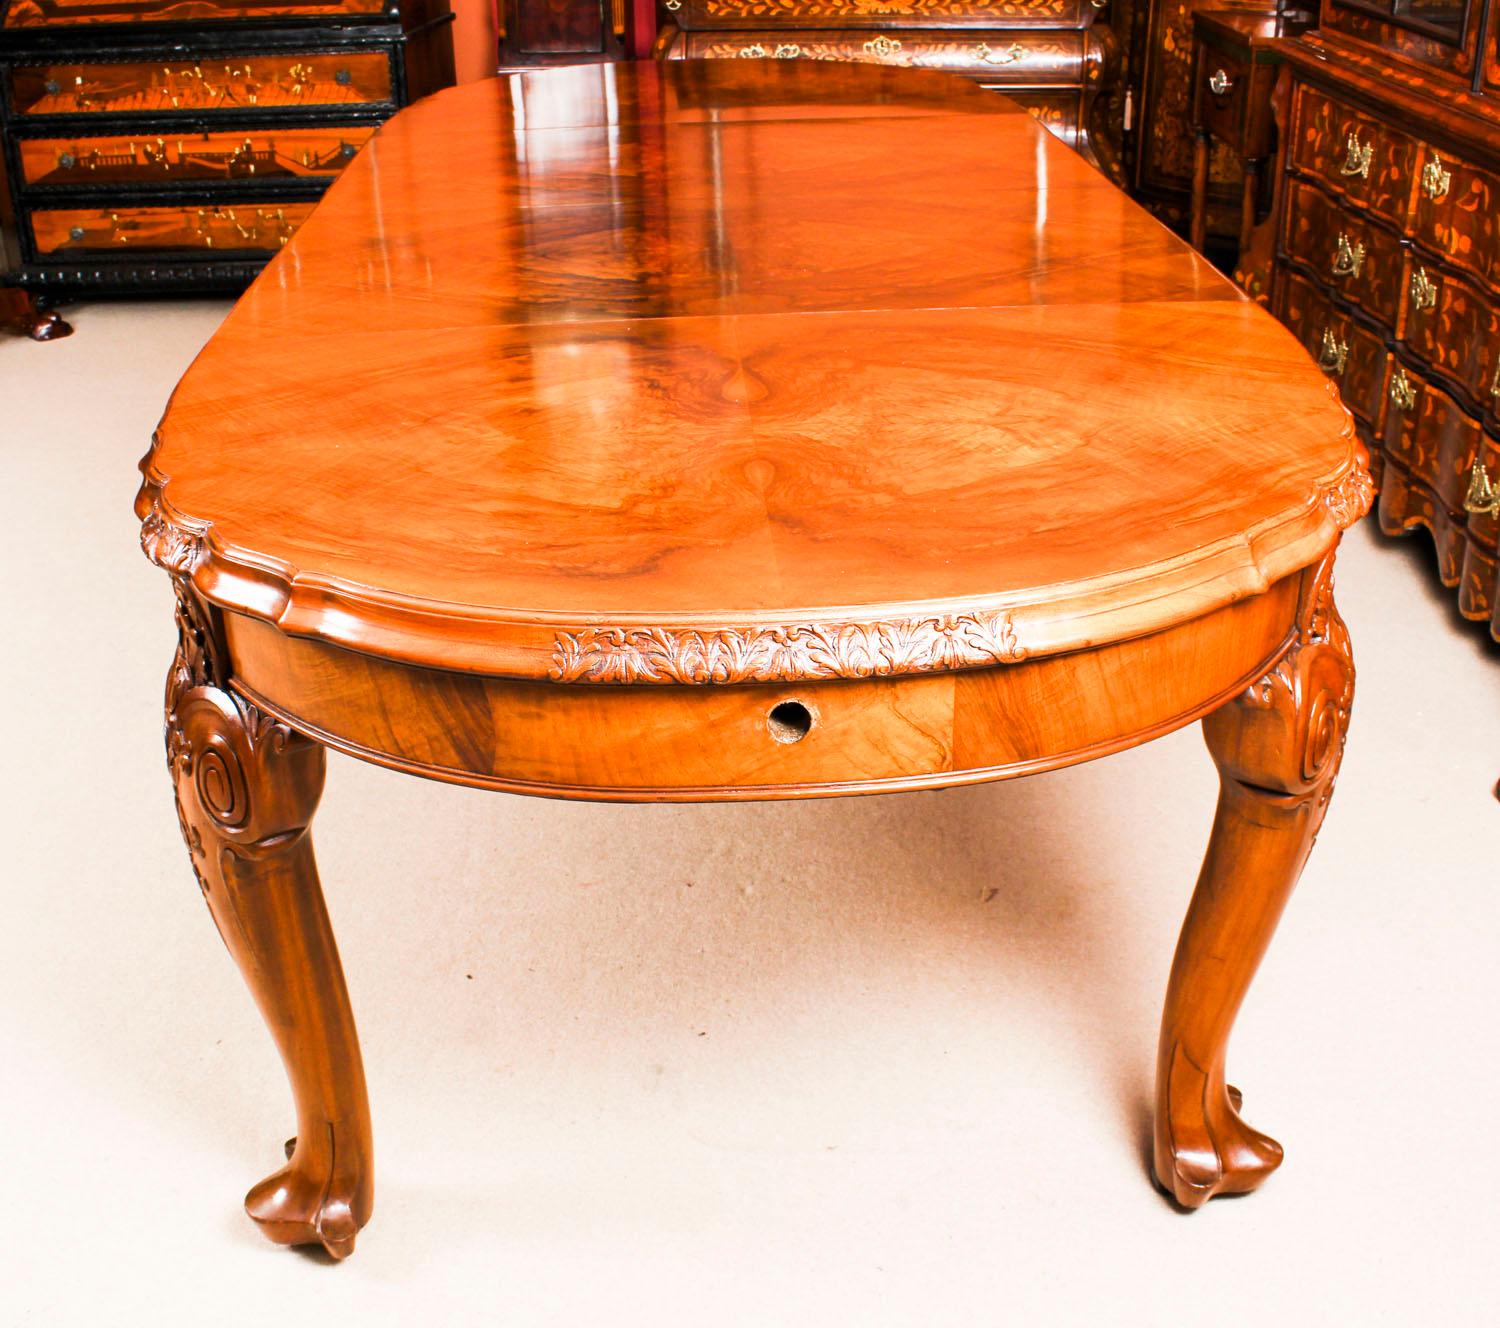 queen anne table and chairs for sale